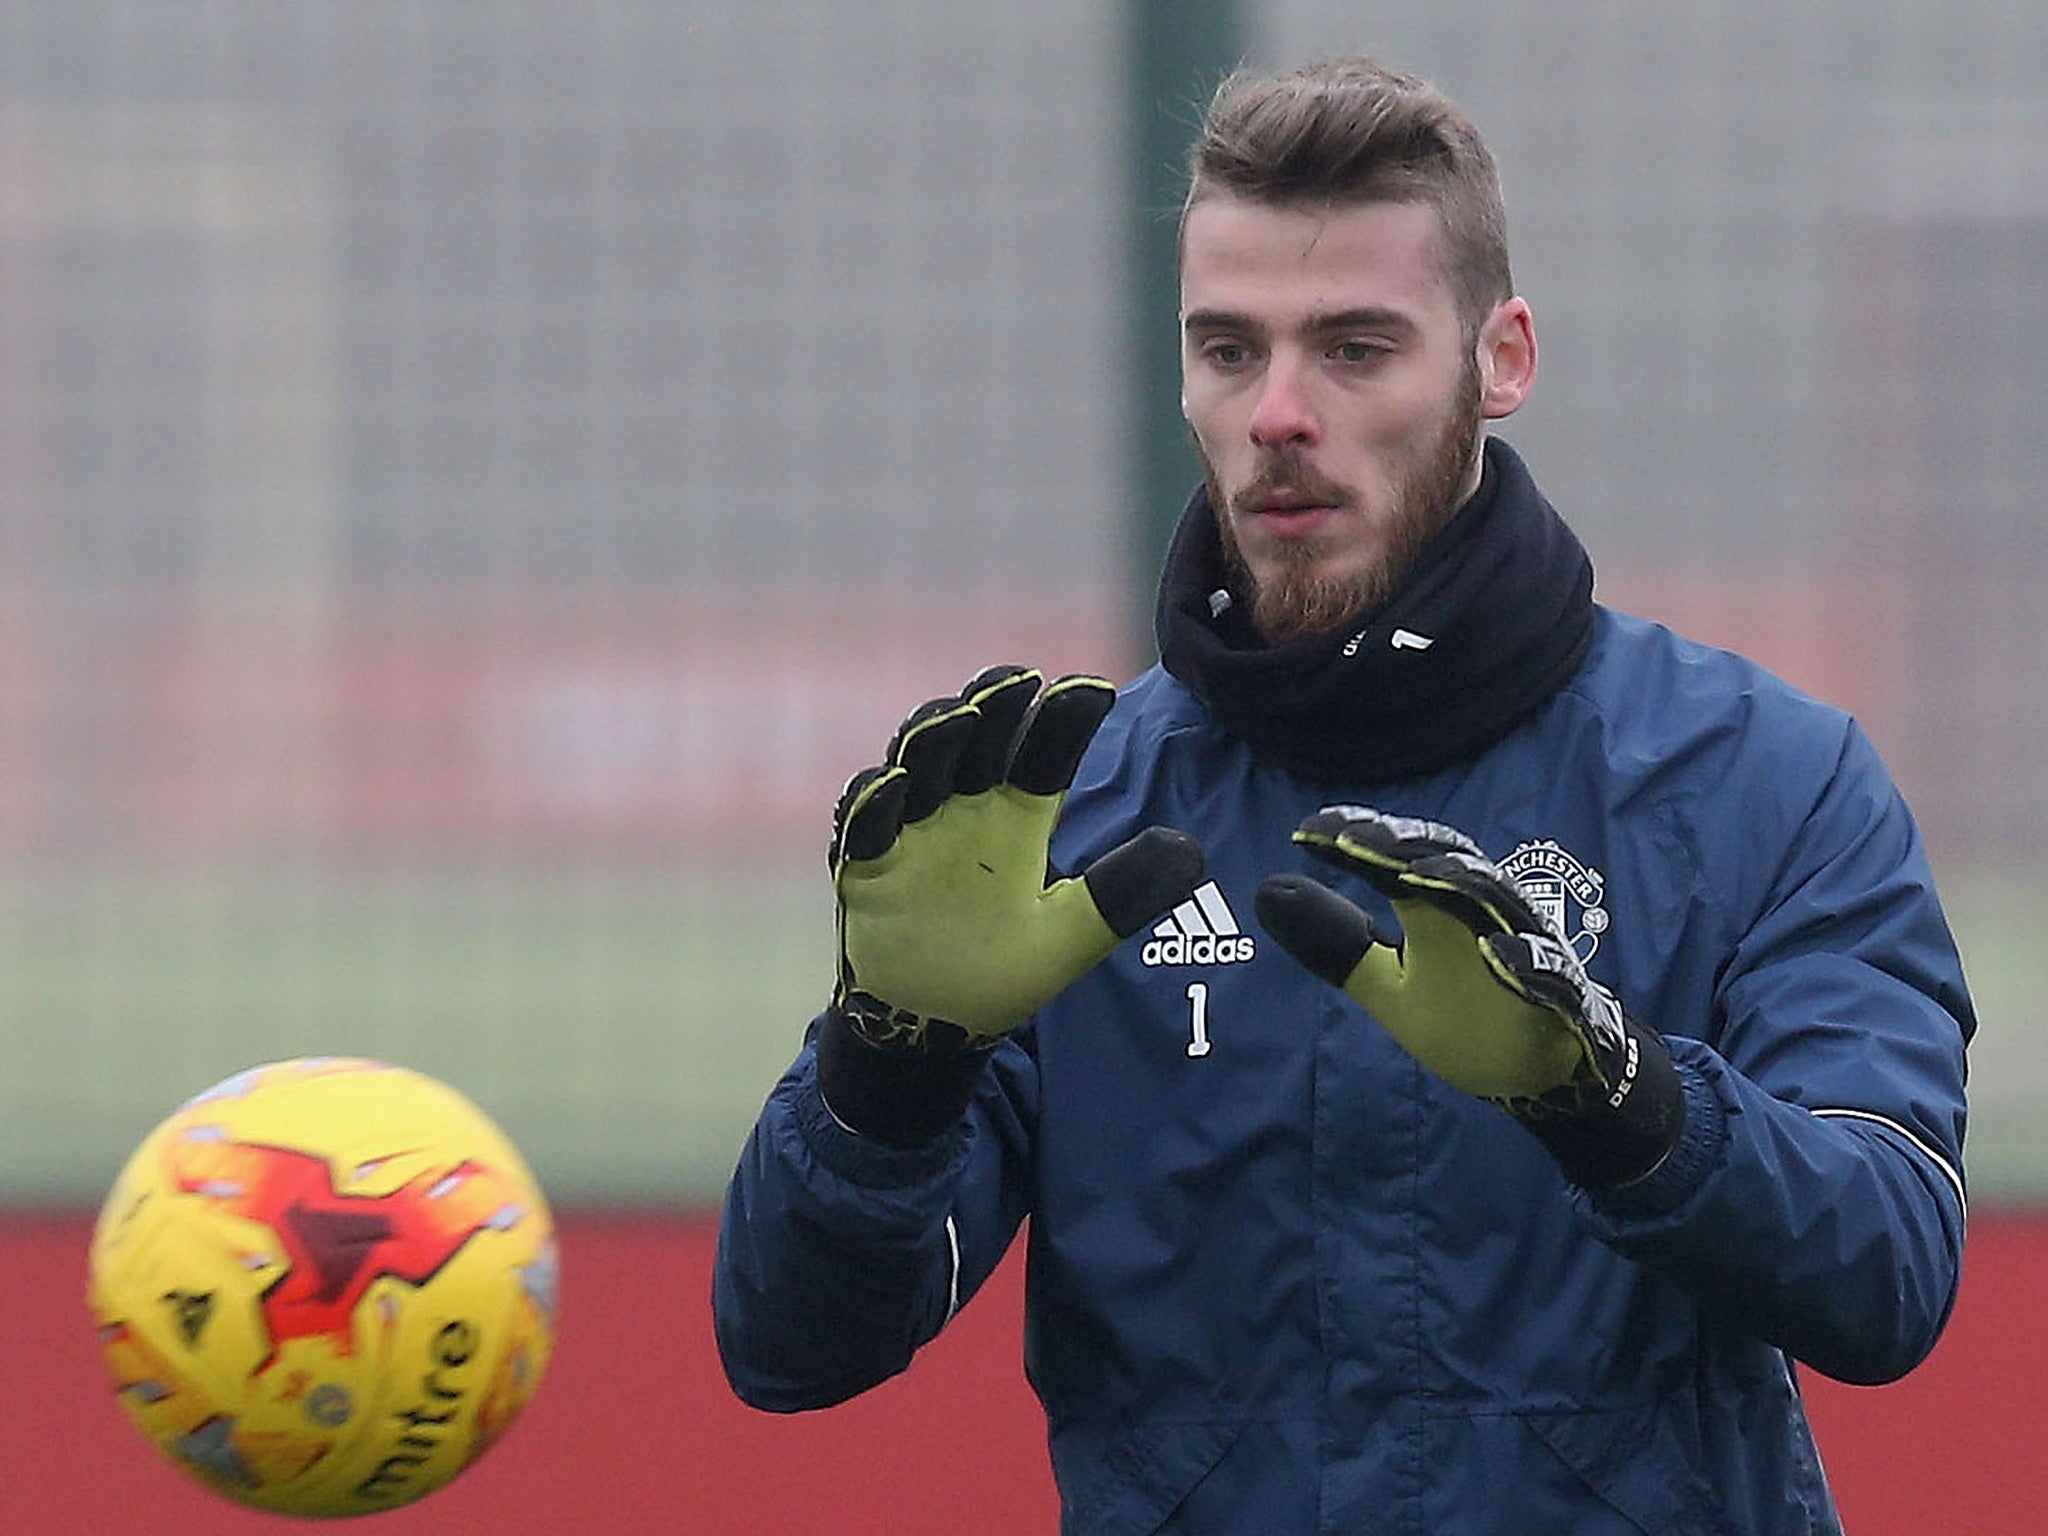 Real Madrid previously agreed a deal to sign David De Gea in the summer of 2015